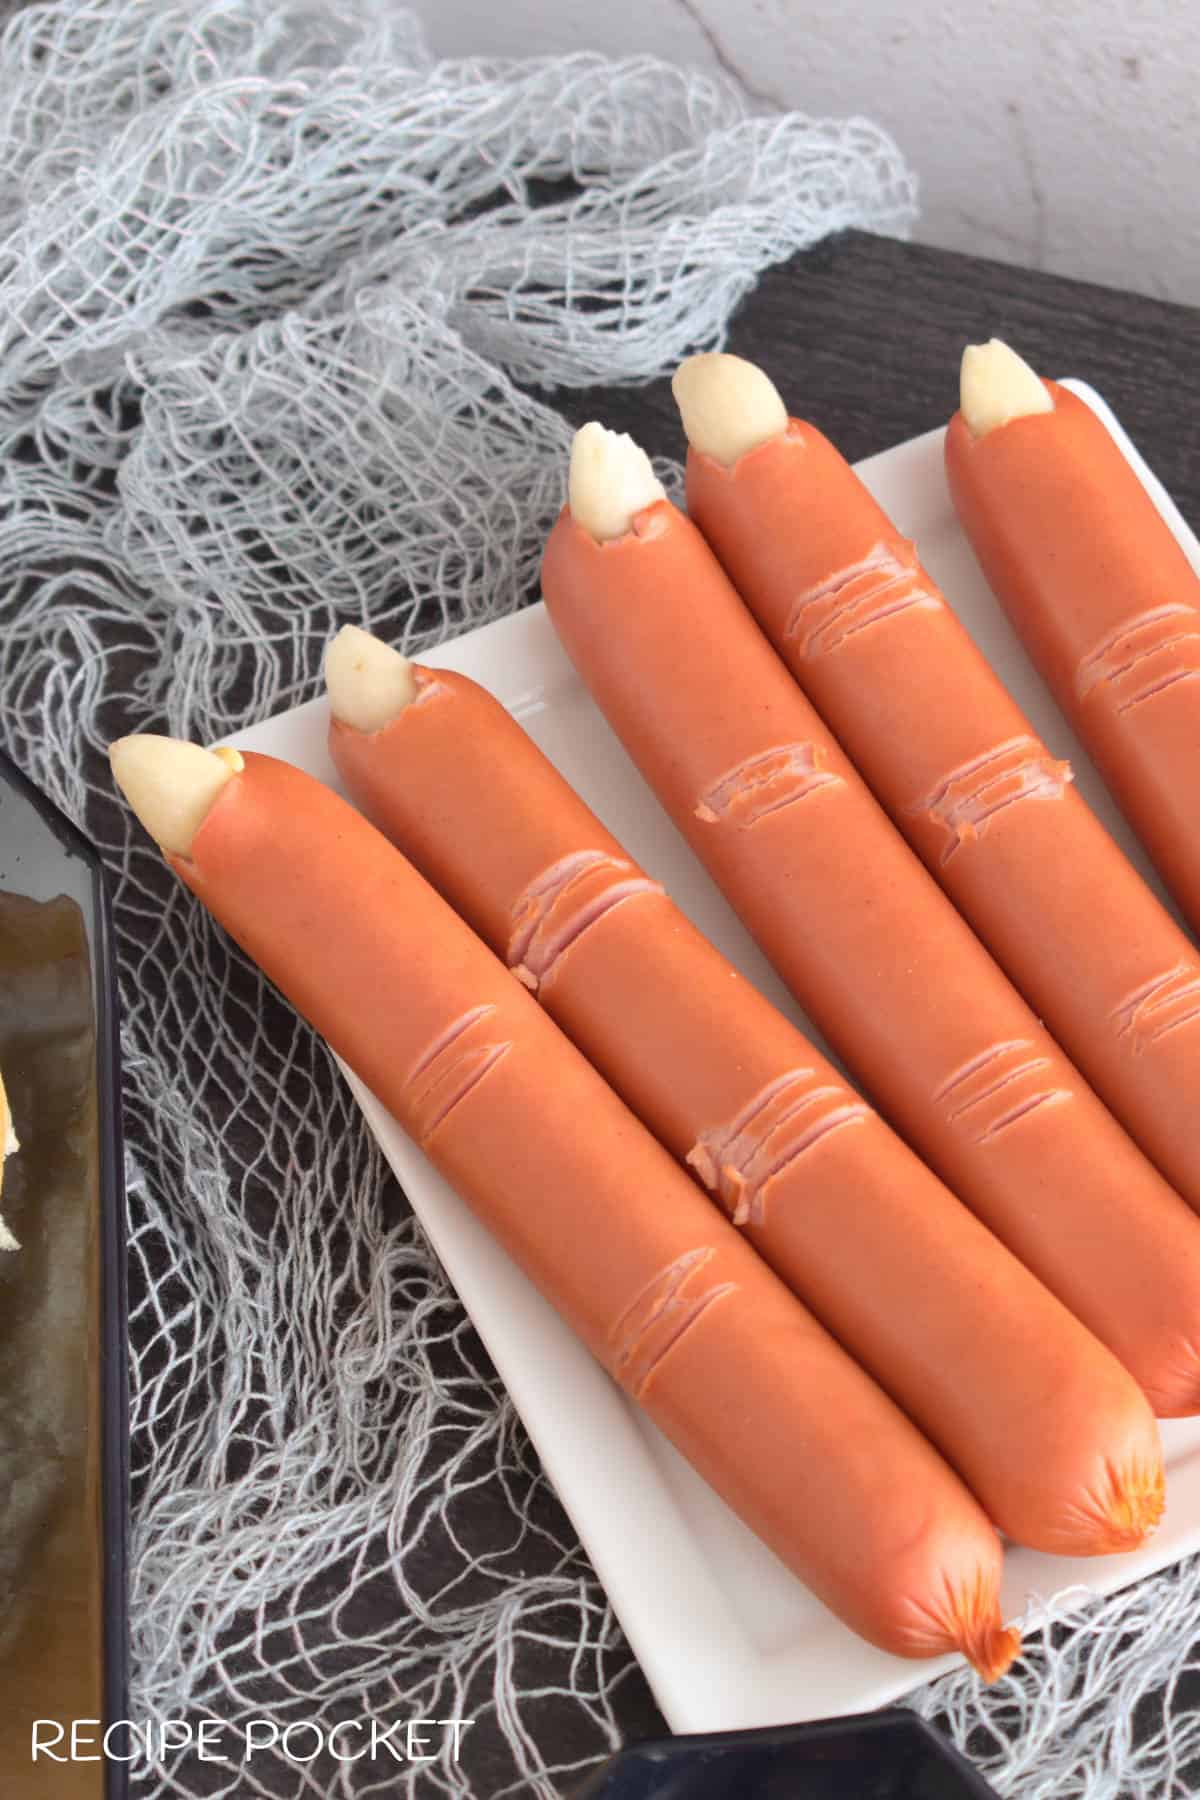 Halloween hot dog fingers on a white plate.